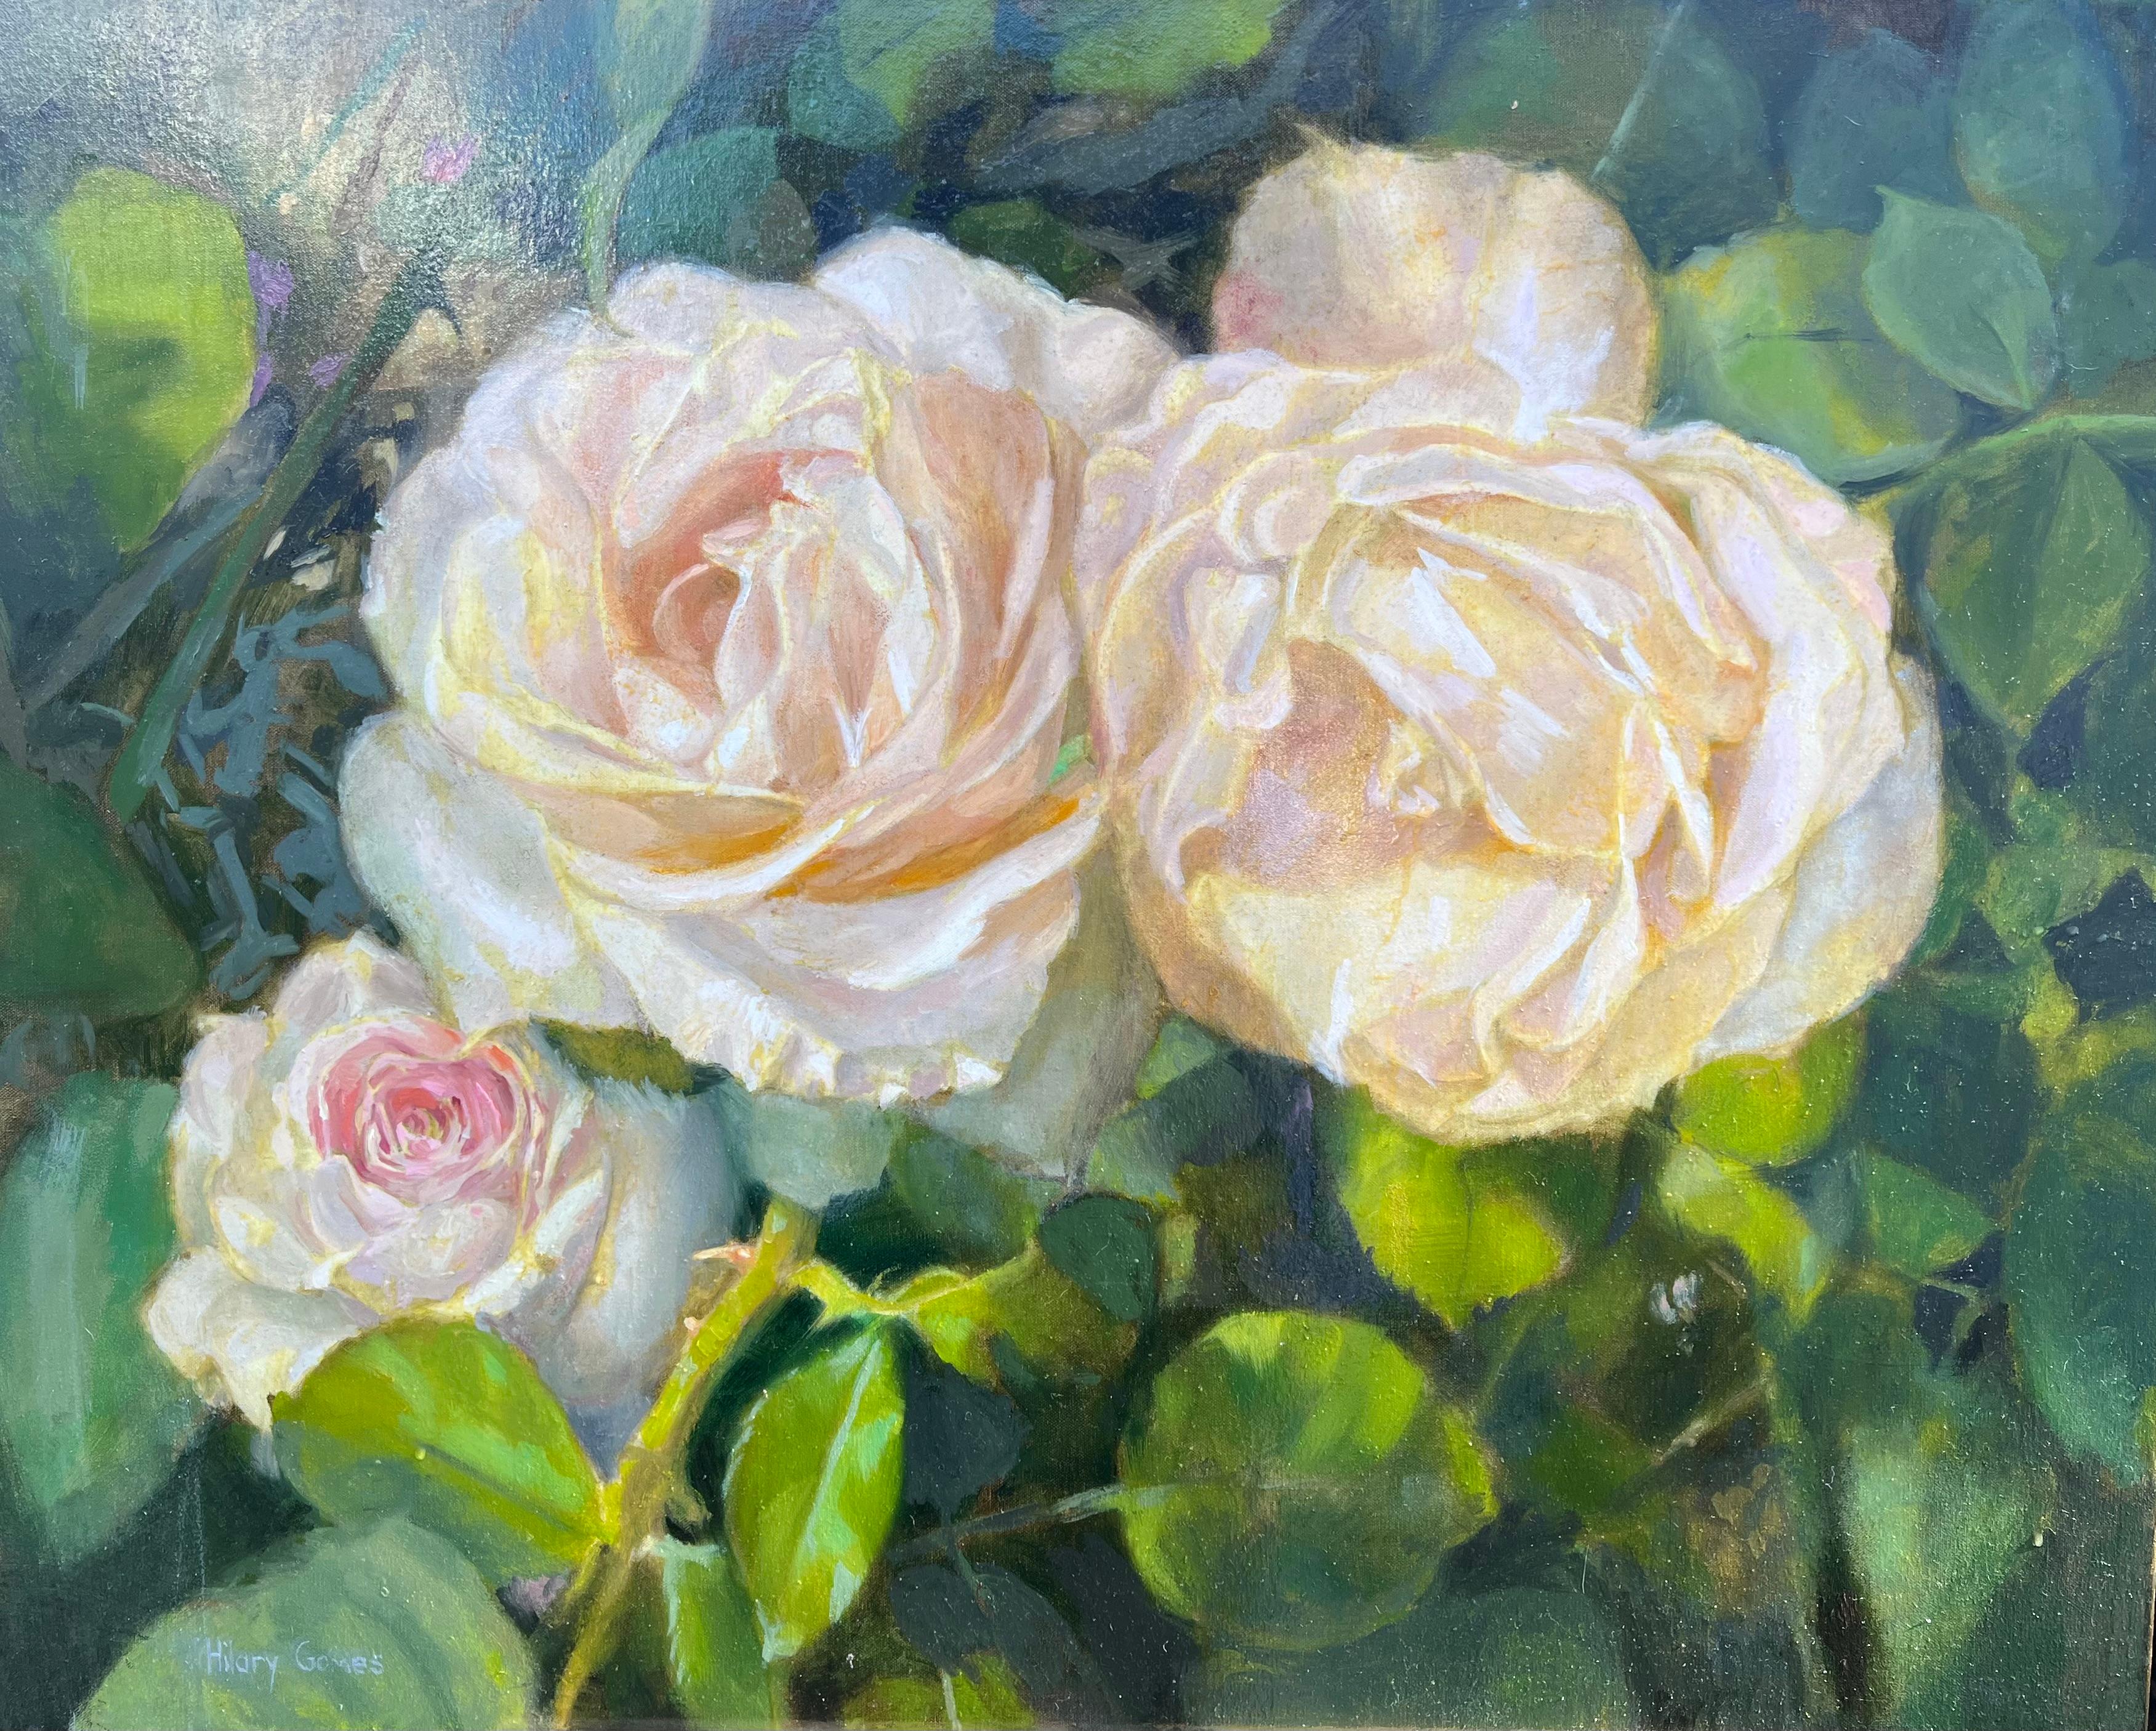 Three Blooming Roses and Thorns, Oil Painting - Art by Hilary Gomes